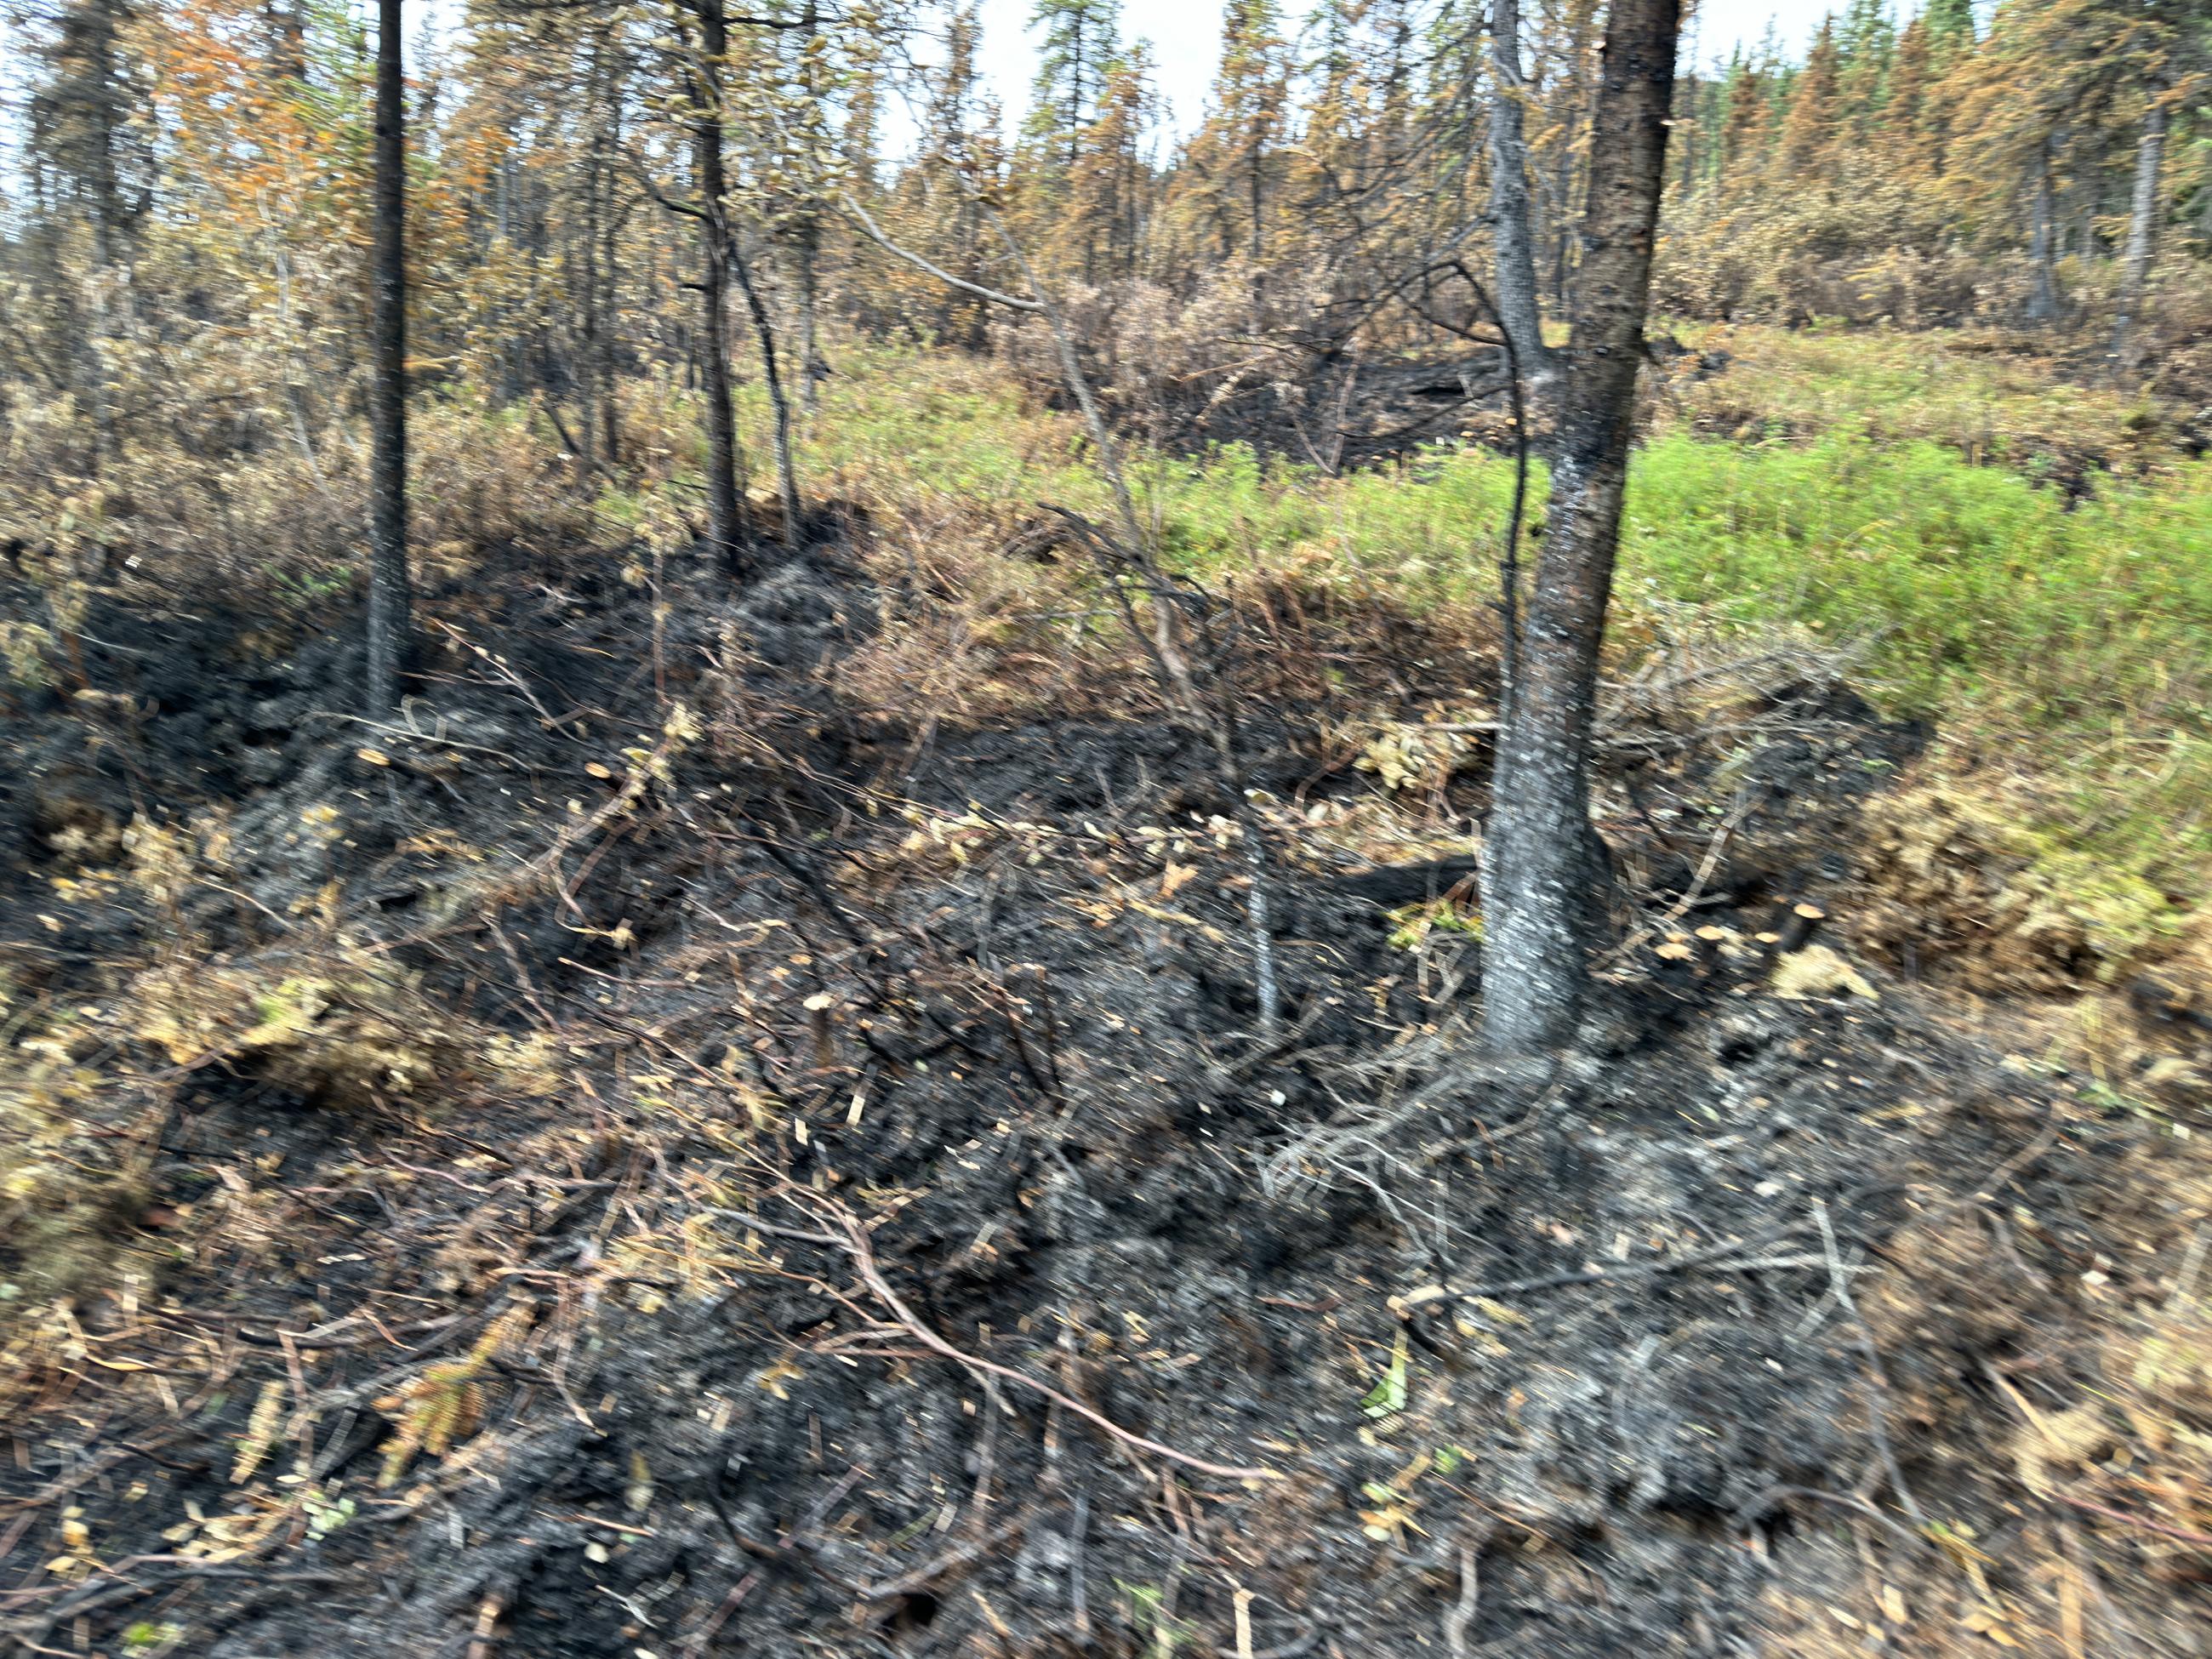 Burned tree roots from fire spread in the duff.